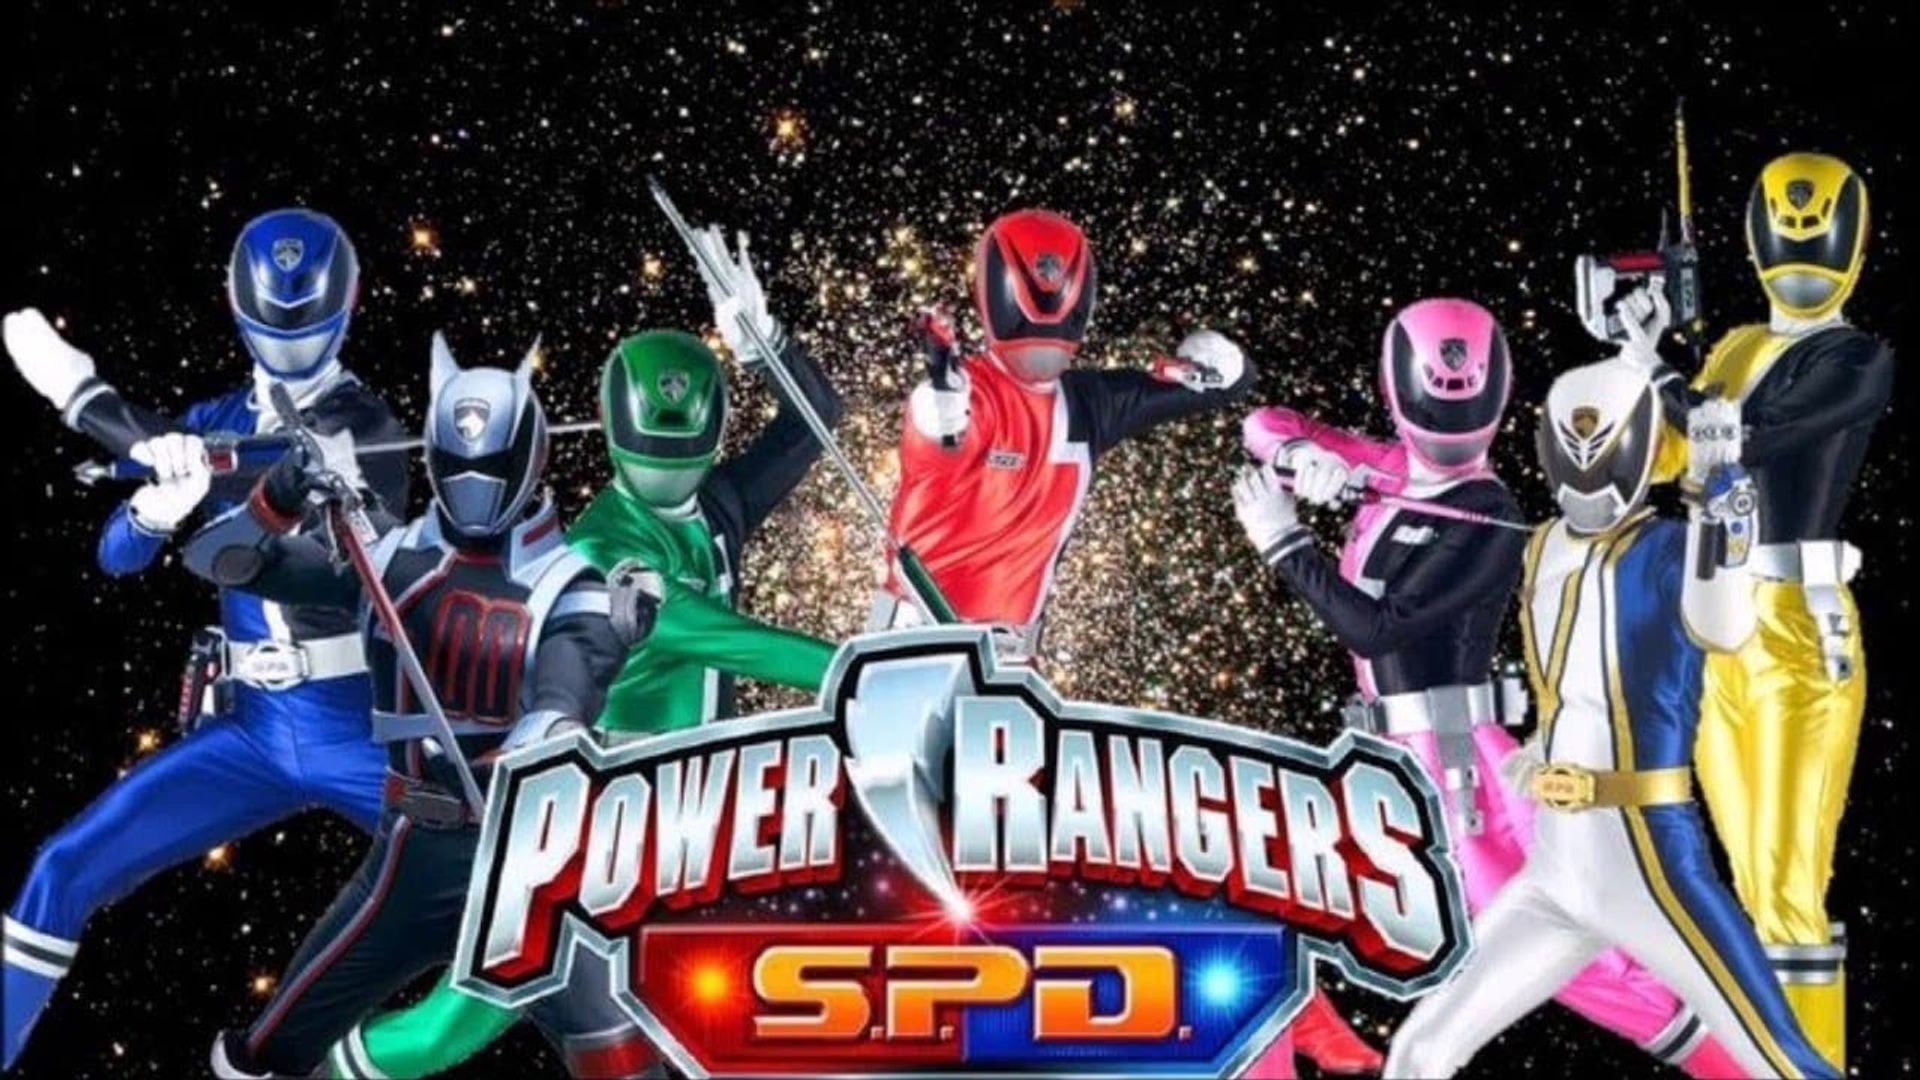 Power Rangers S.P.D Season 1: Where To Watch Every Episode